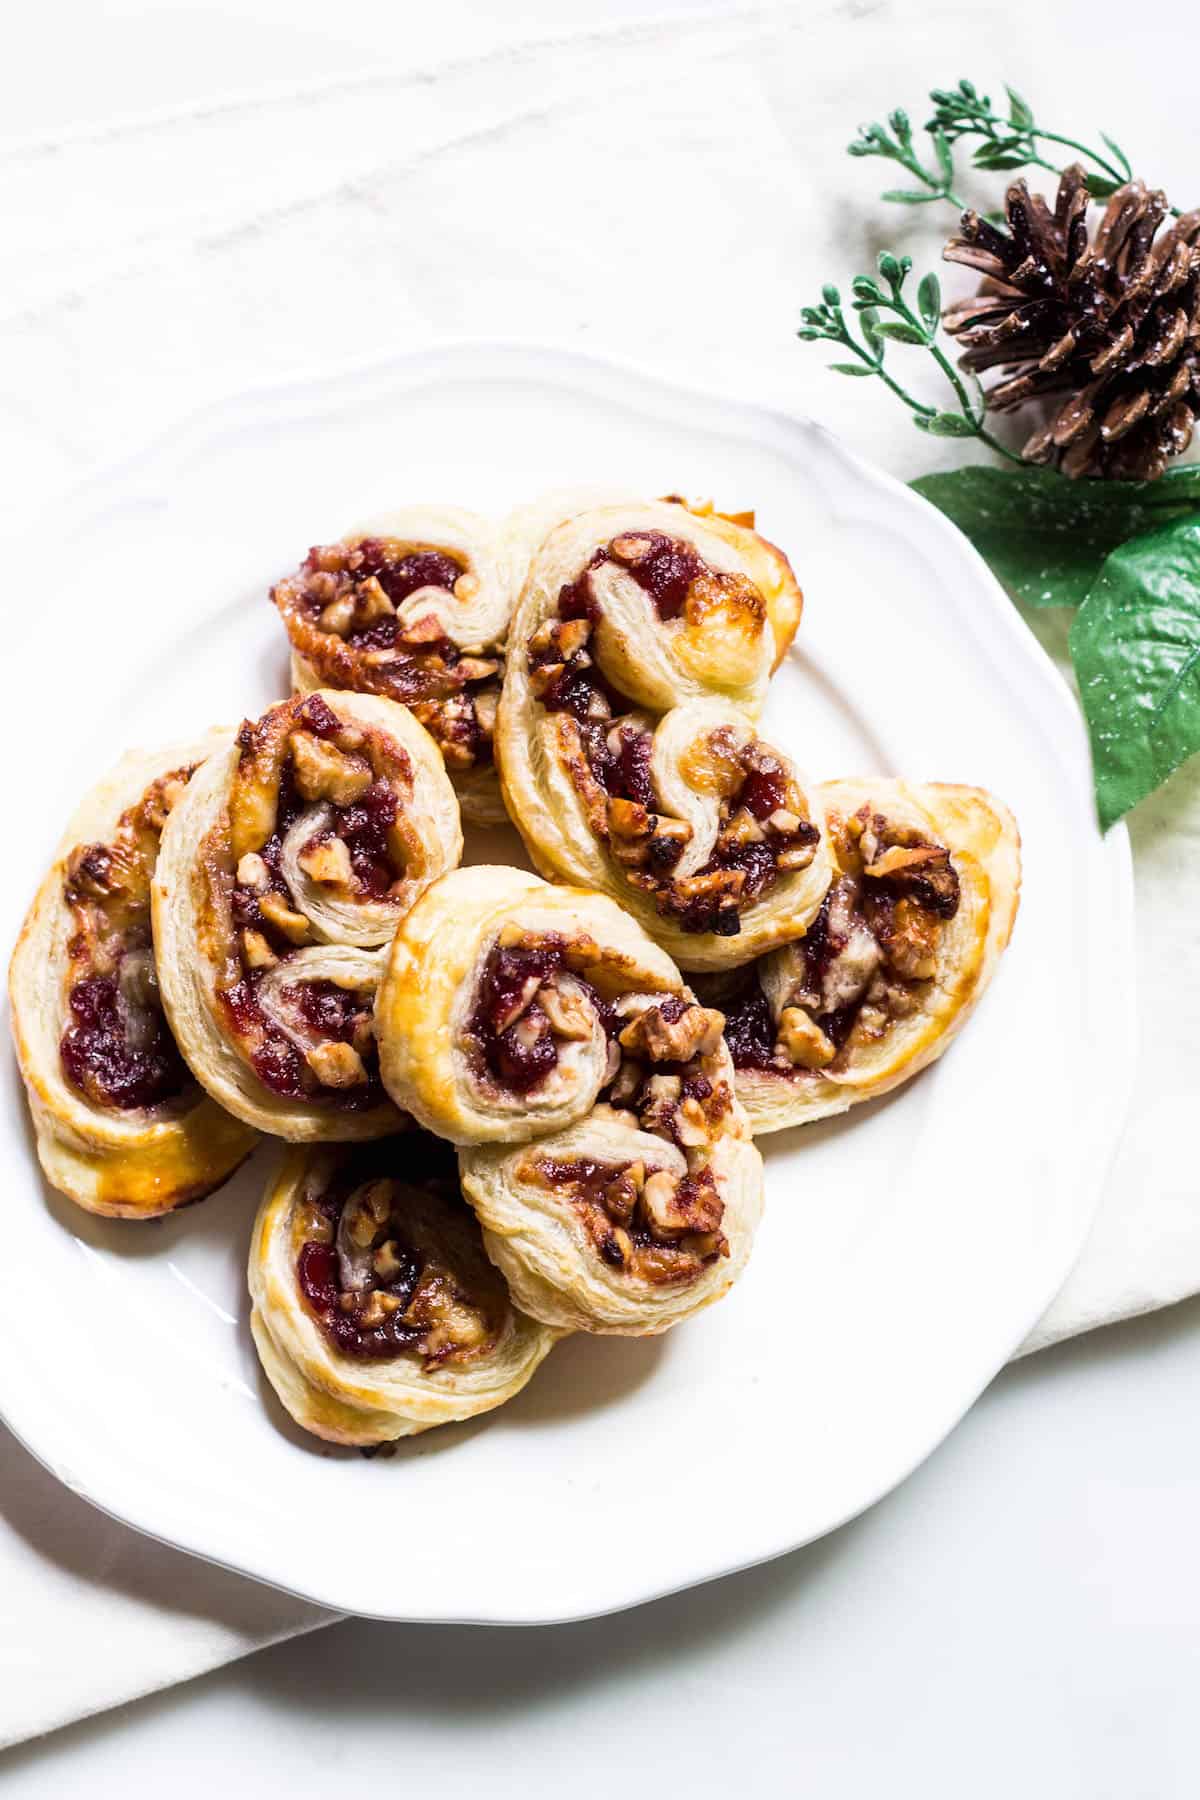 Brie and Cranberry Palmiers